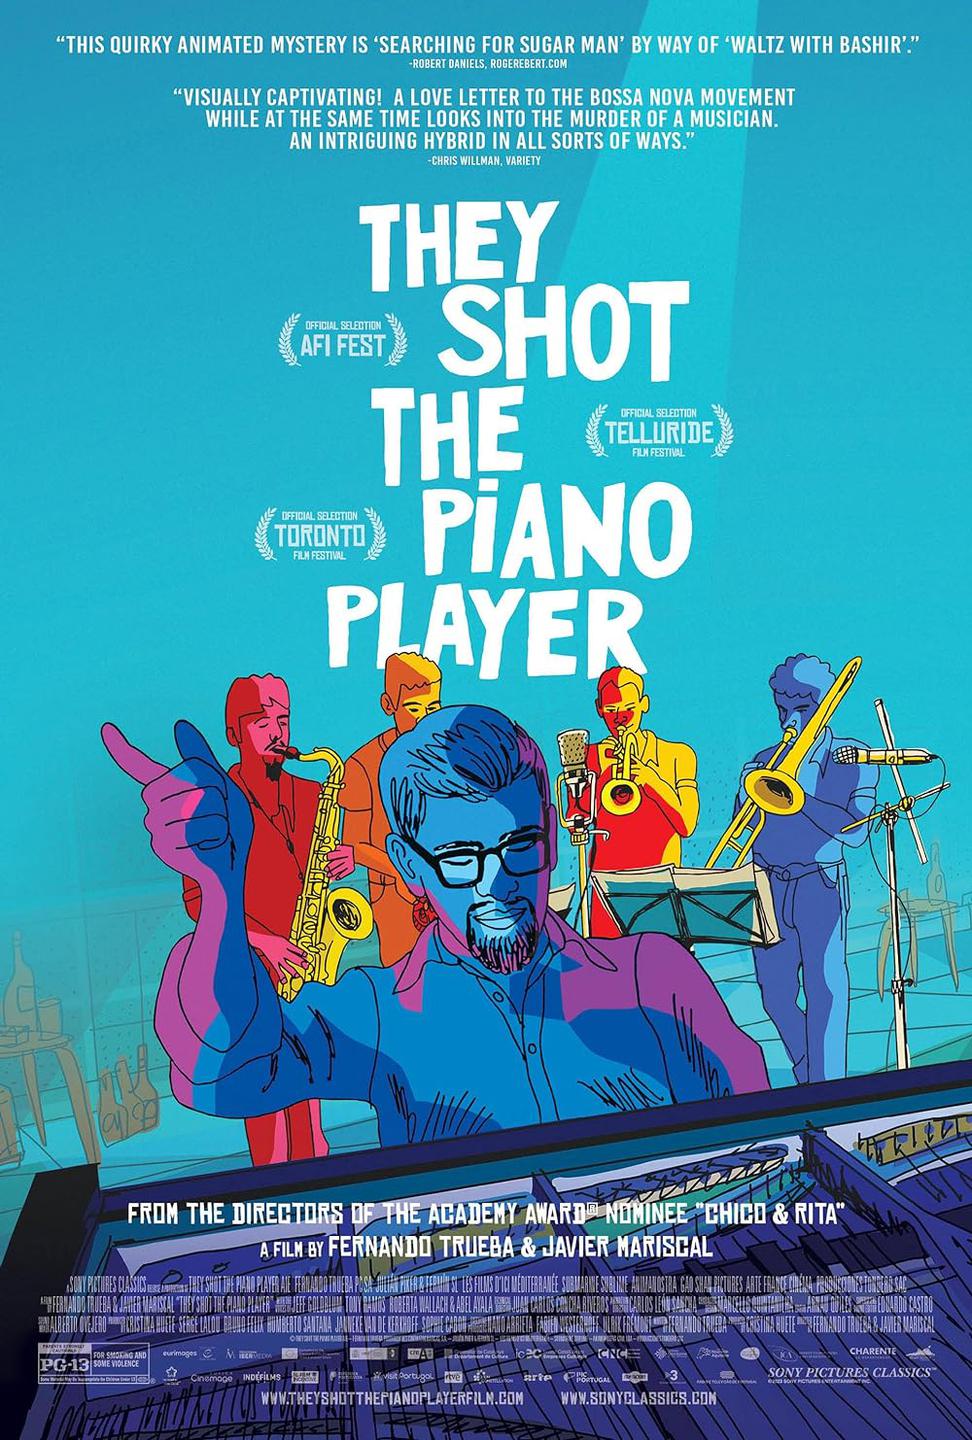 THEY SHOT THE PIANO PLAYER